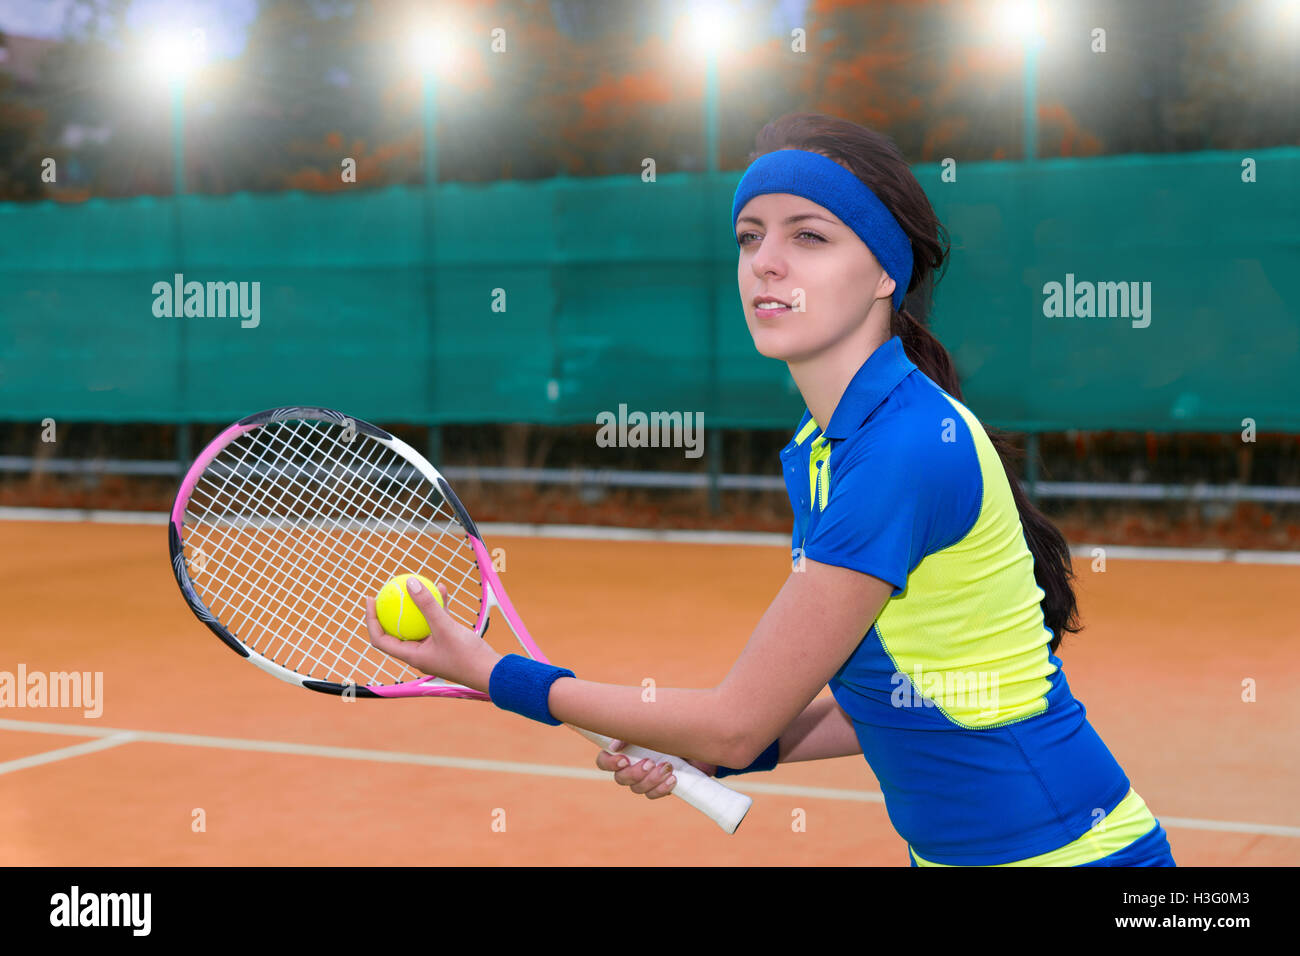 Beautiful young female tennis player serving wearing a sportswear during a tennis match on clay court  background with lights outdoor in evening. Stock Photo